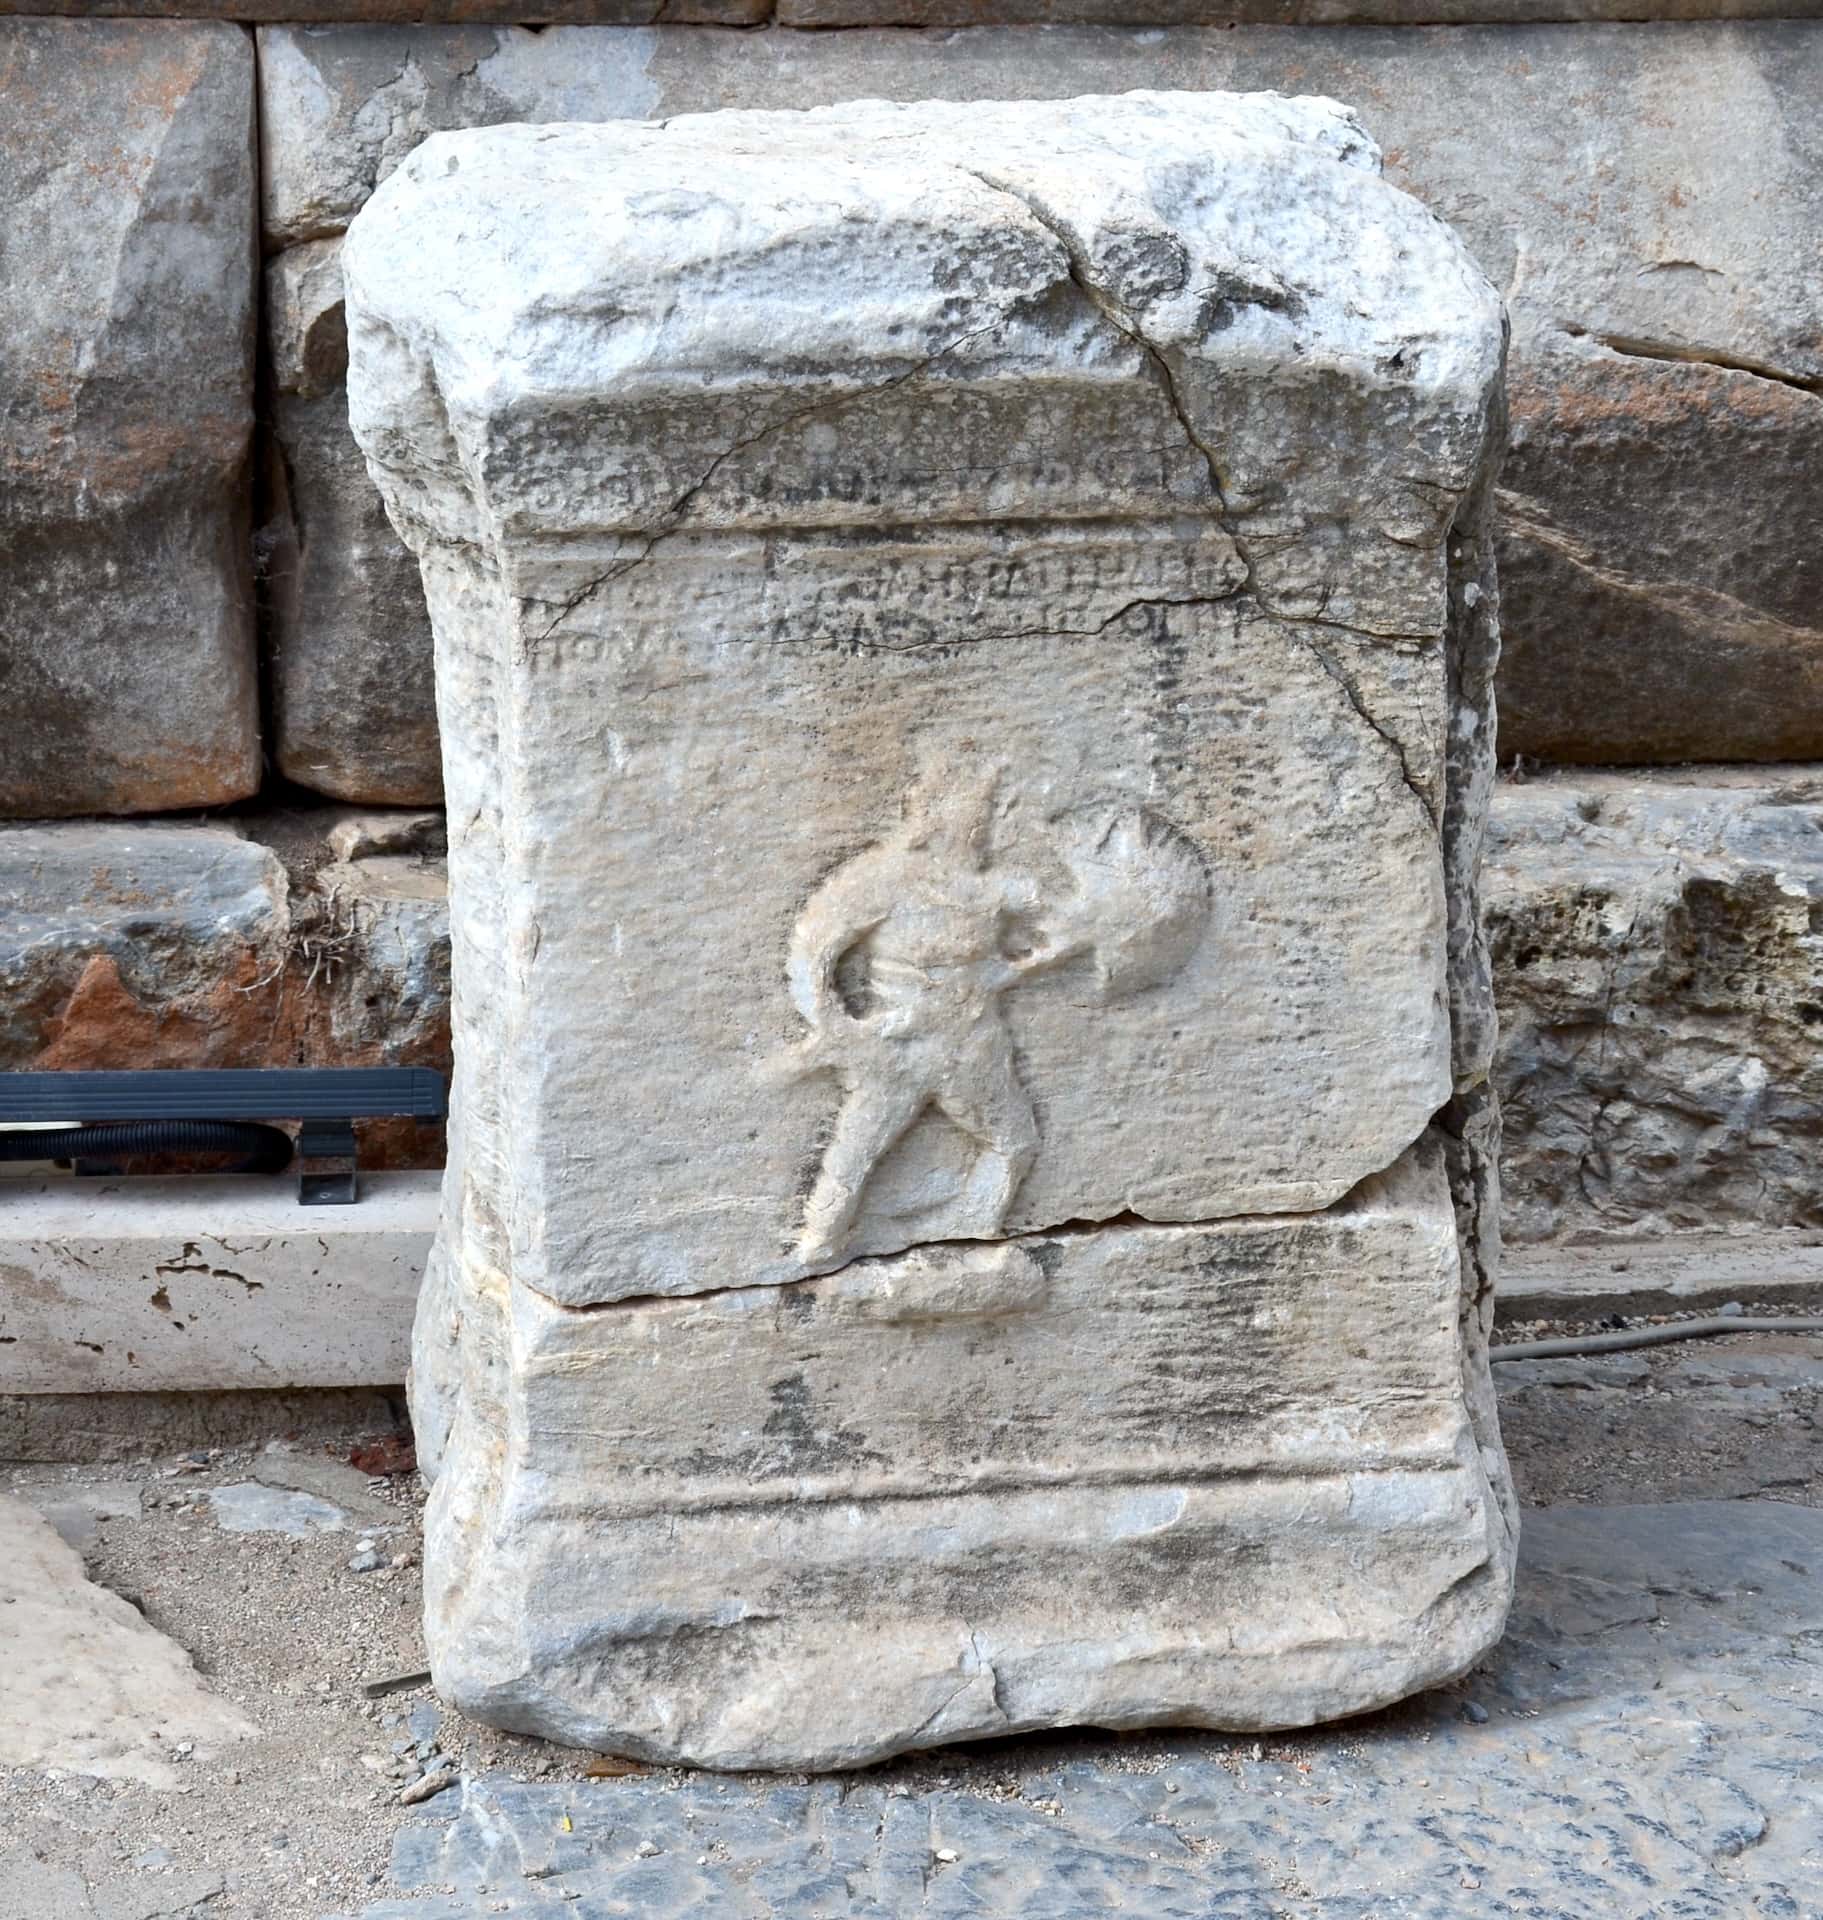 Advertisement for a gladiatorial contest on the Marble Road in Ephesus